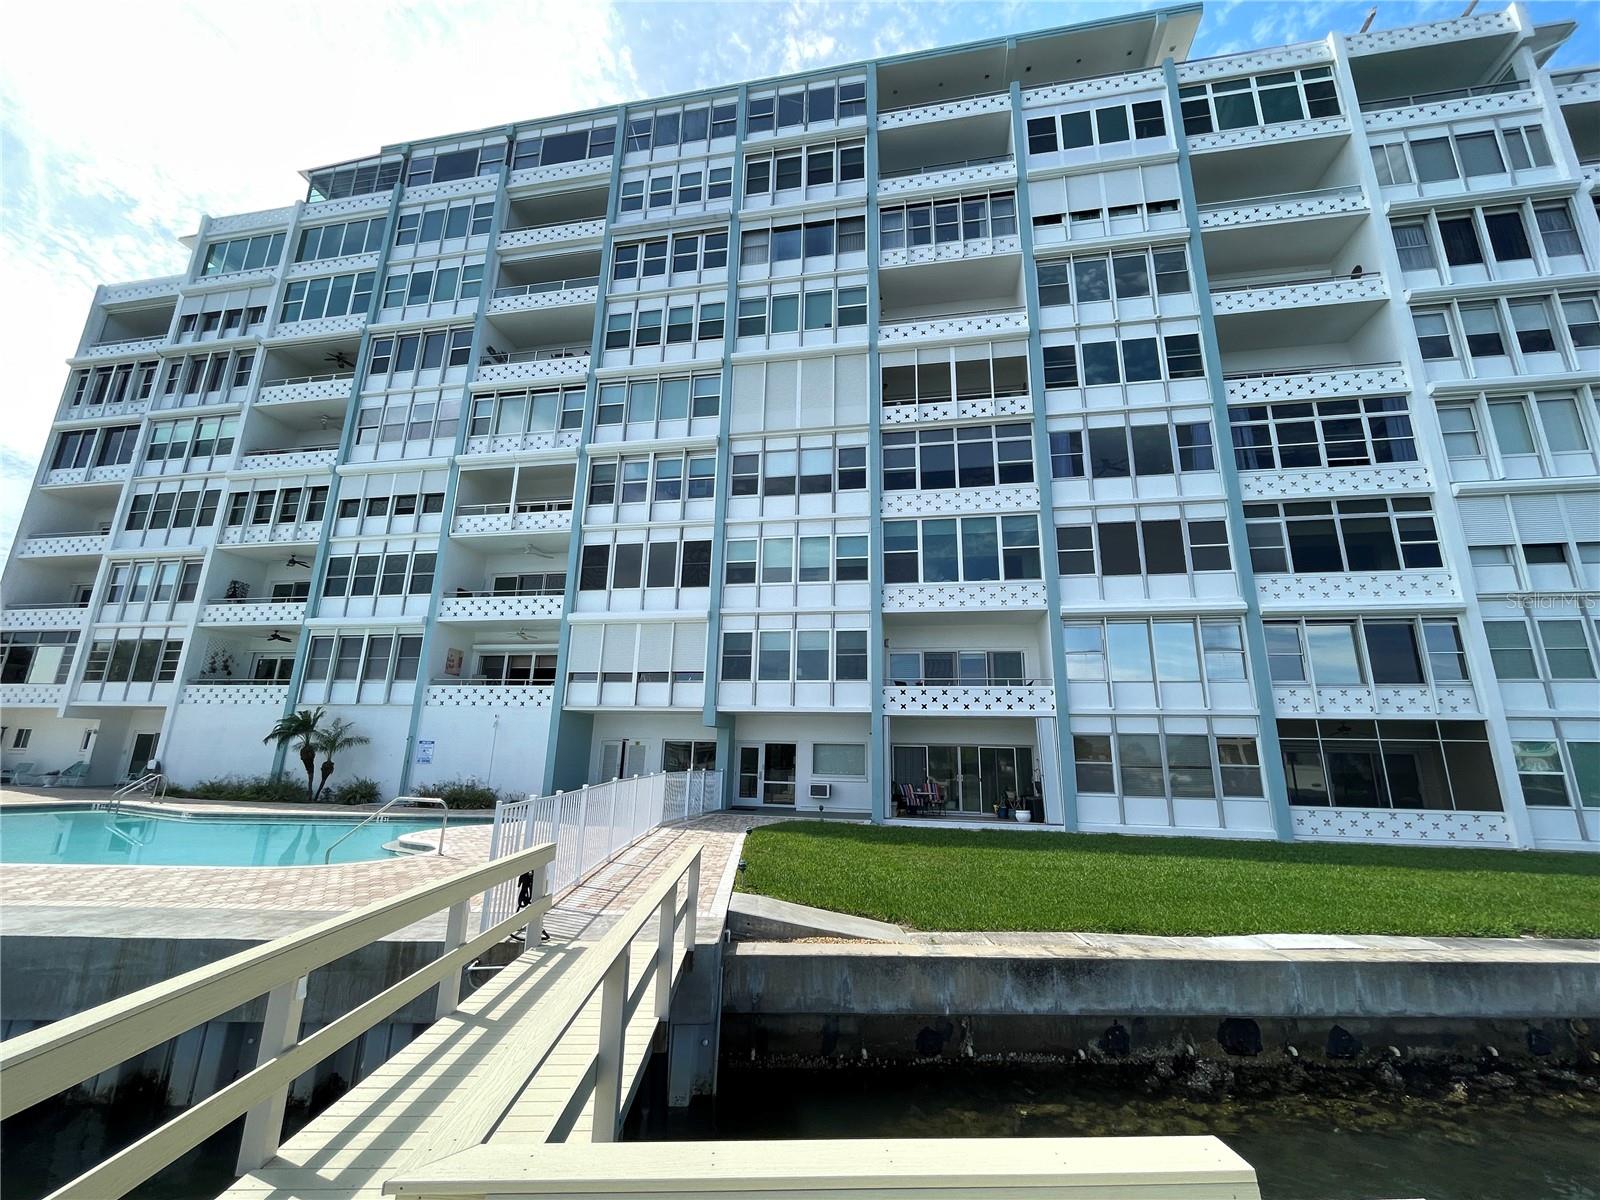 Back of the complex from the 2nd dock and pool area